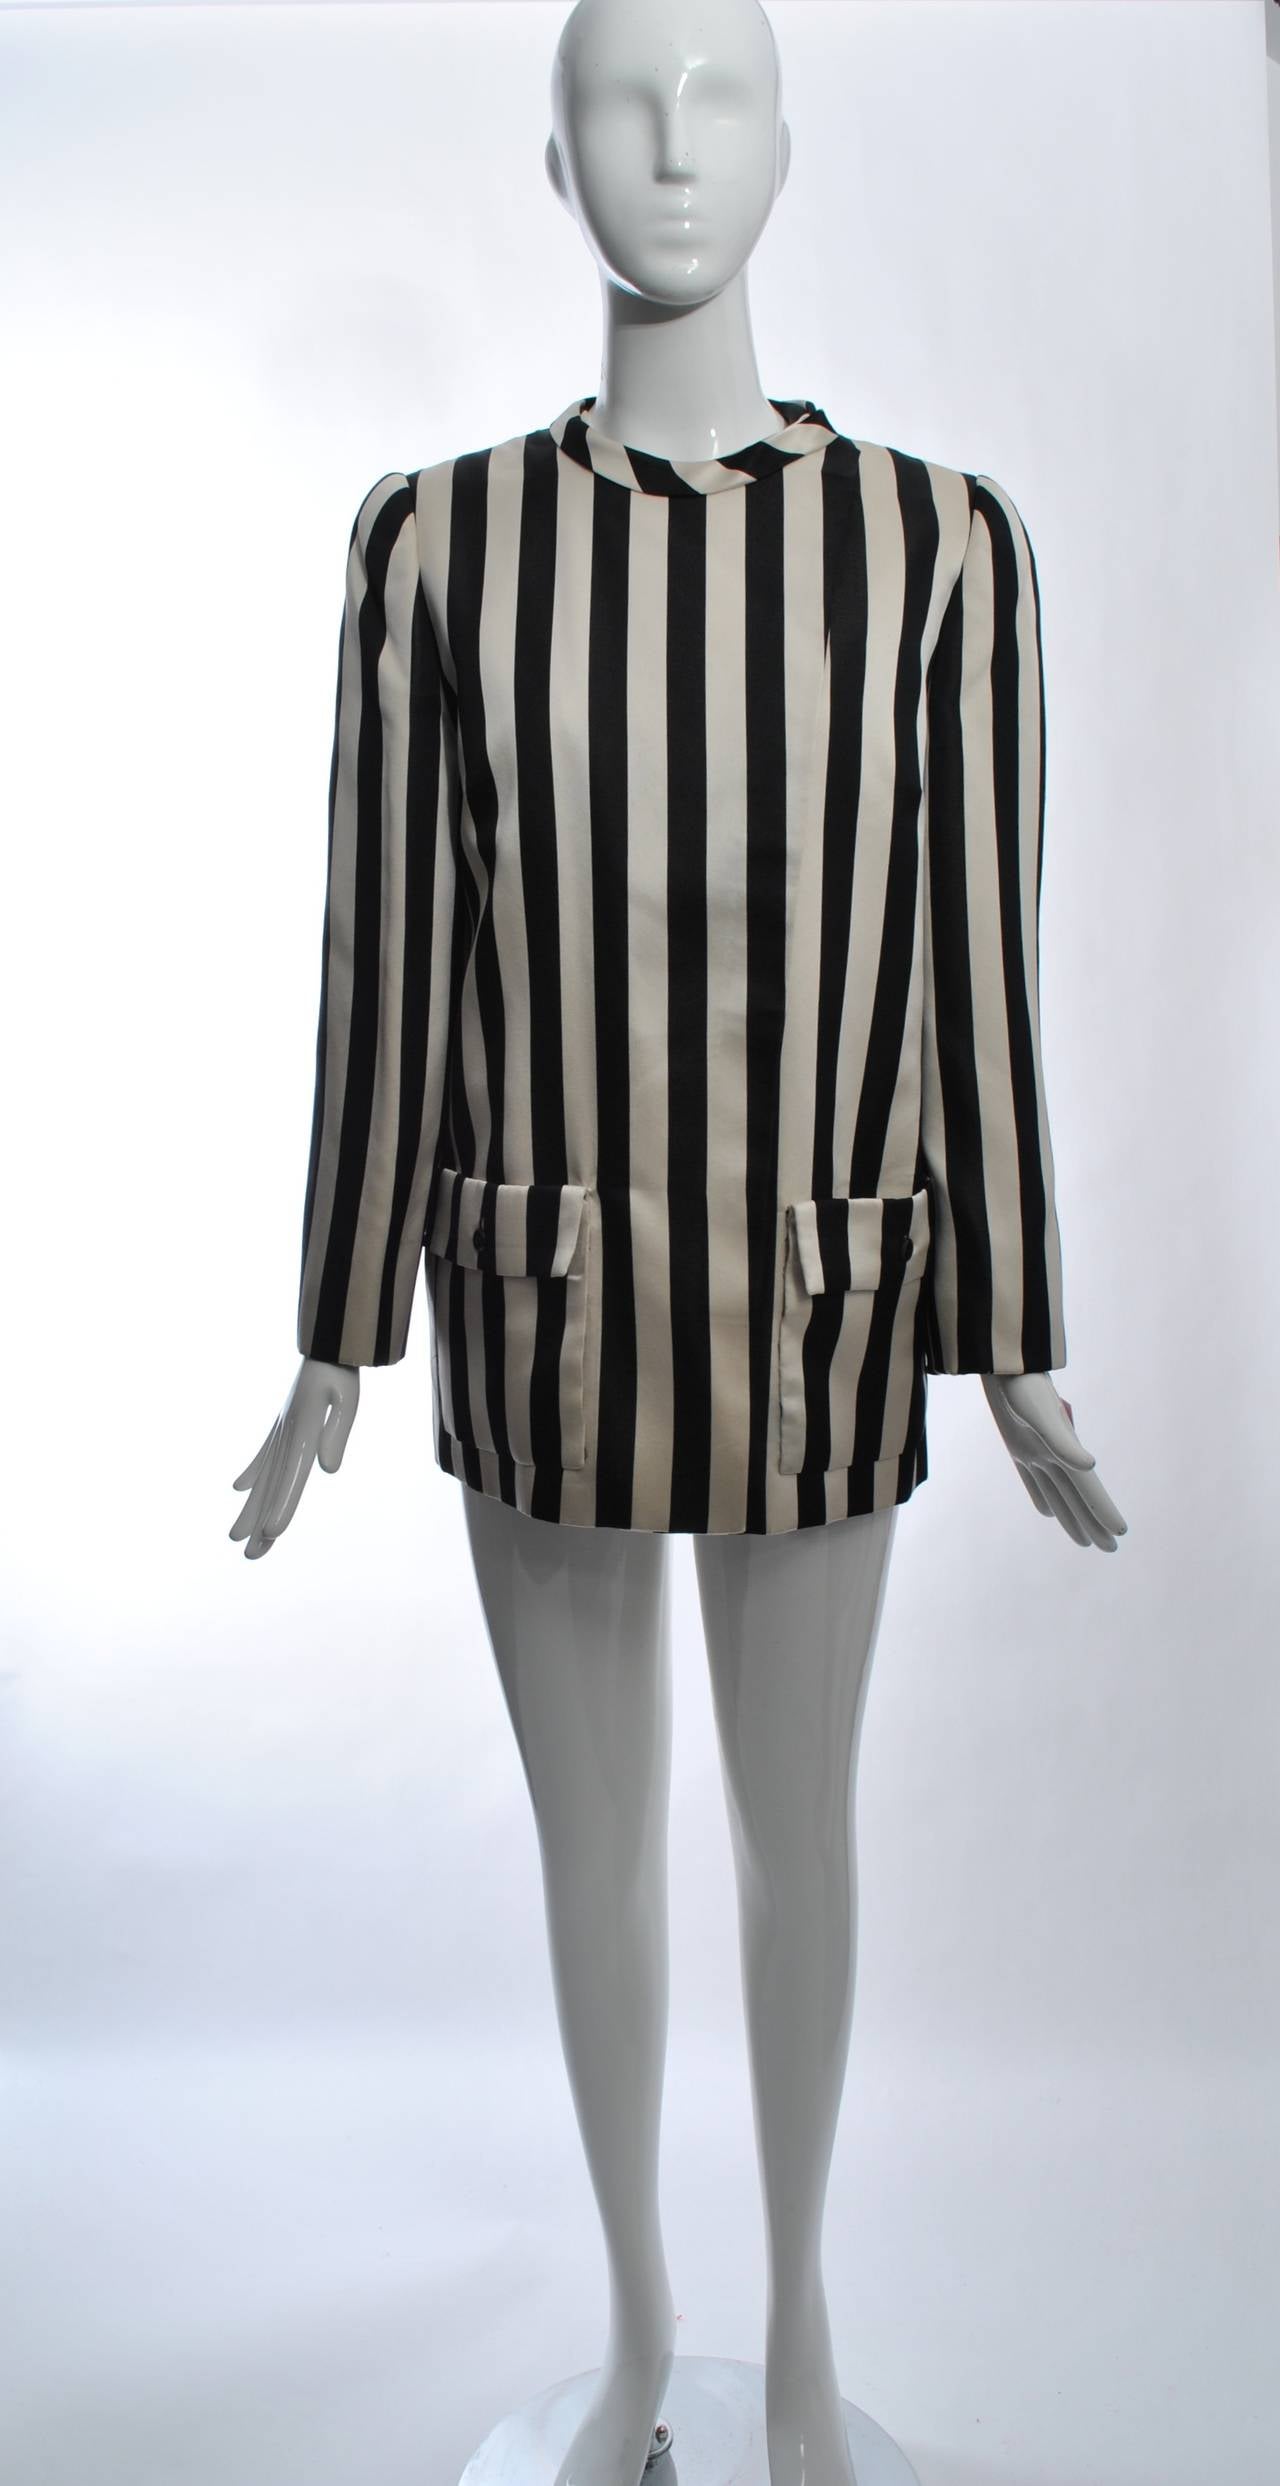 Andre Laug 1980s satin jacket in black and white vertical stripes featuring a  rounded neckline and patch pockets with hidden buttons under a placket down the front. Underneath is a collared vest in black satin with a white collar, belted in back.